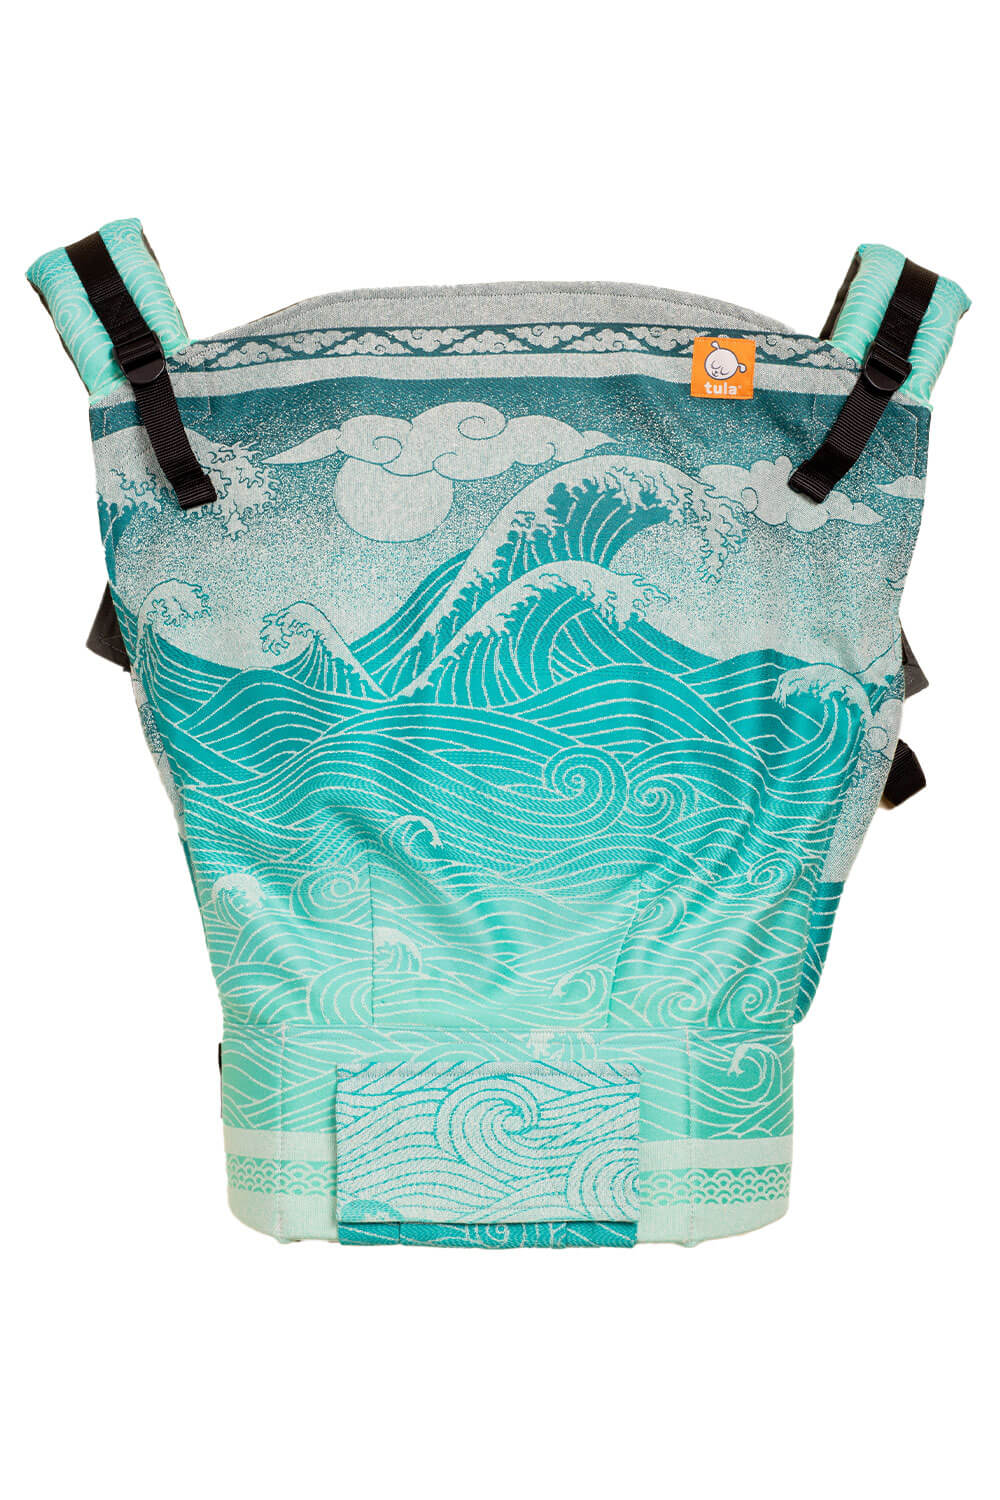 Okinami Wipeout - Signature Woven Preschool Carrier